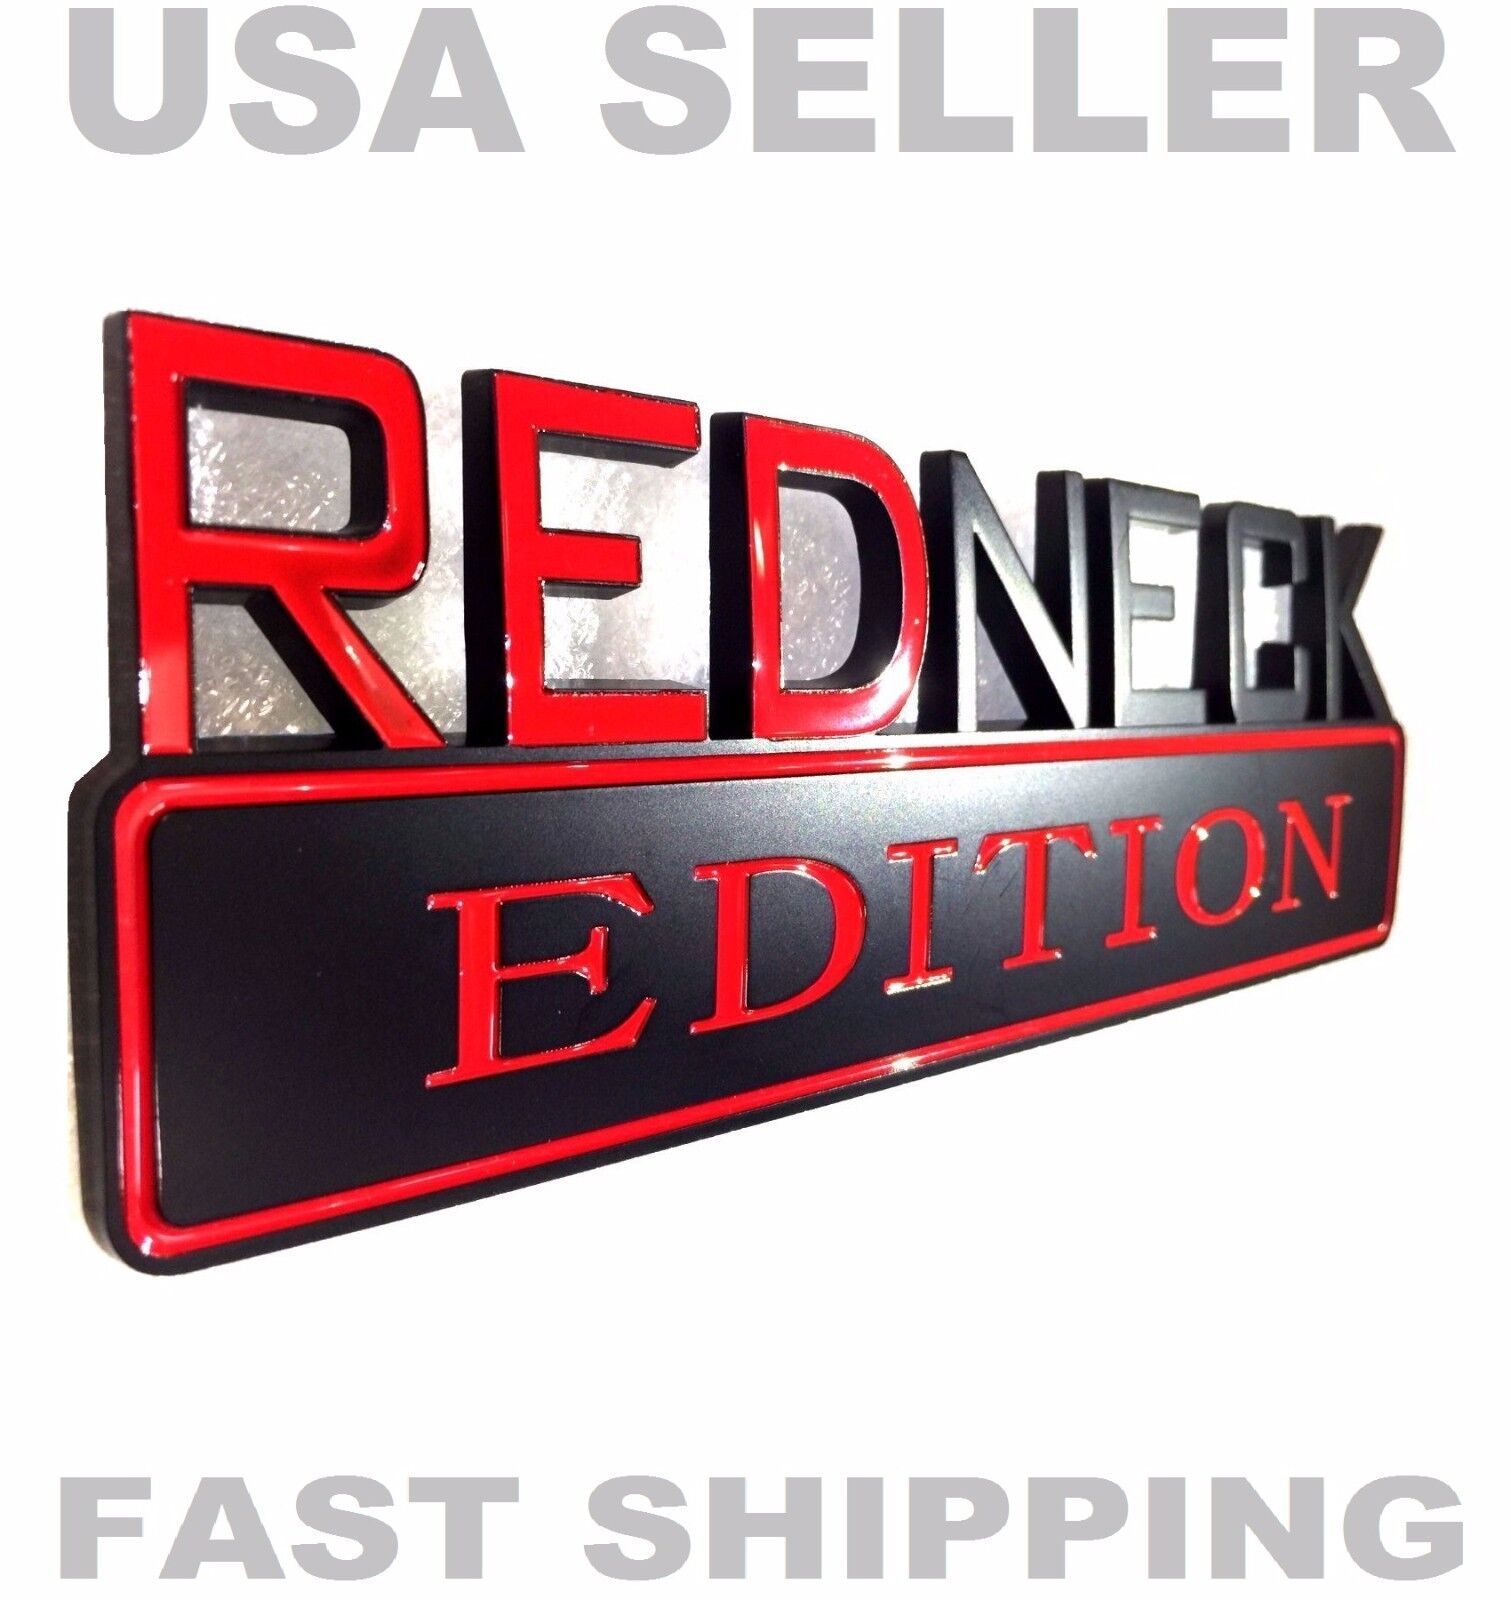 REDNECK EDITION car QUALITY EMBLEM truck decal logo black WILL FIT ALL VEHICLES